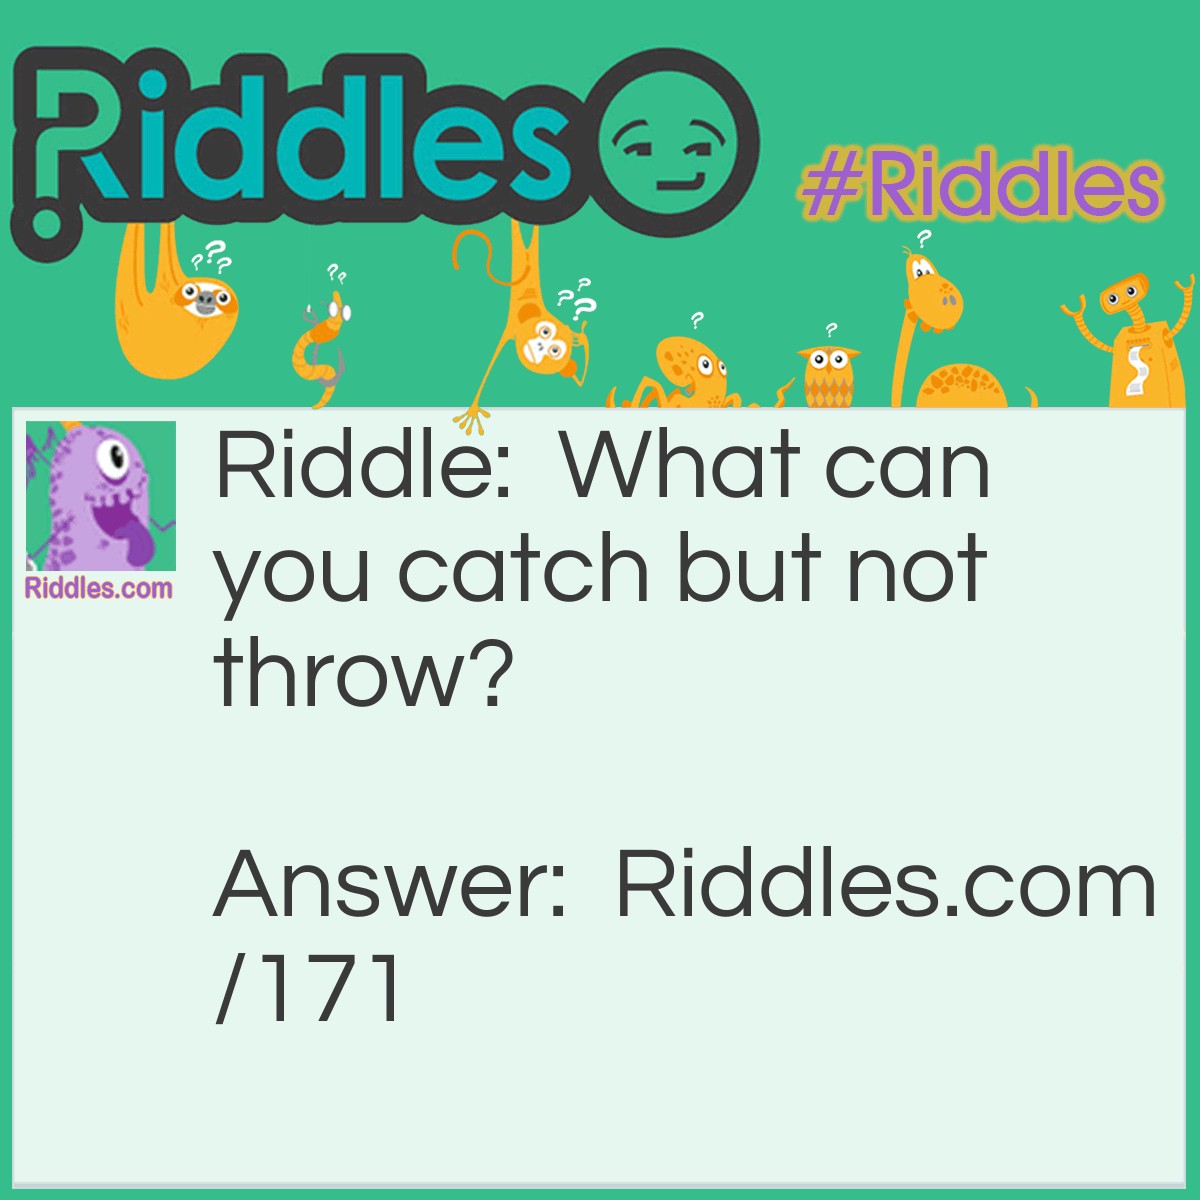 Riddle: What can you catch but not throw? Answer: A cold.